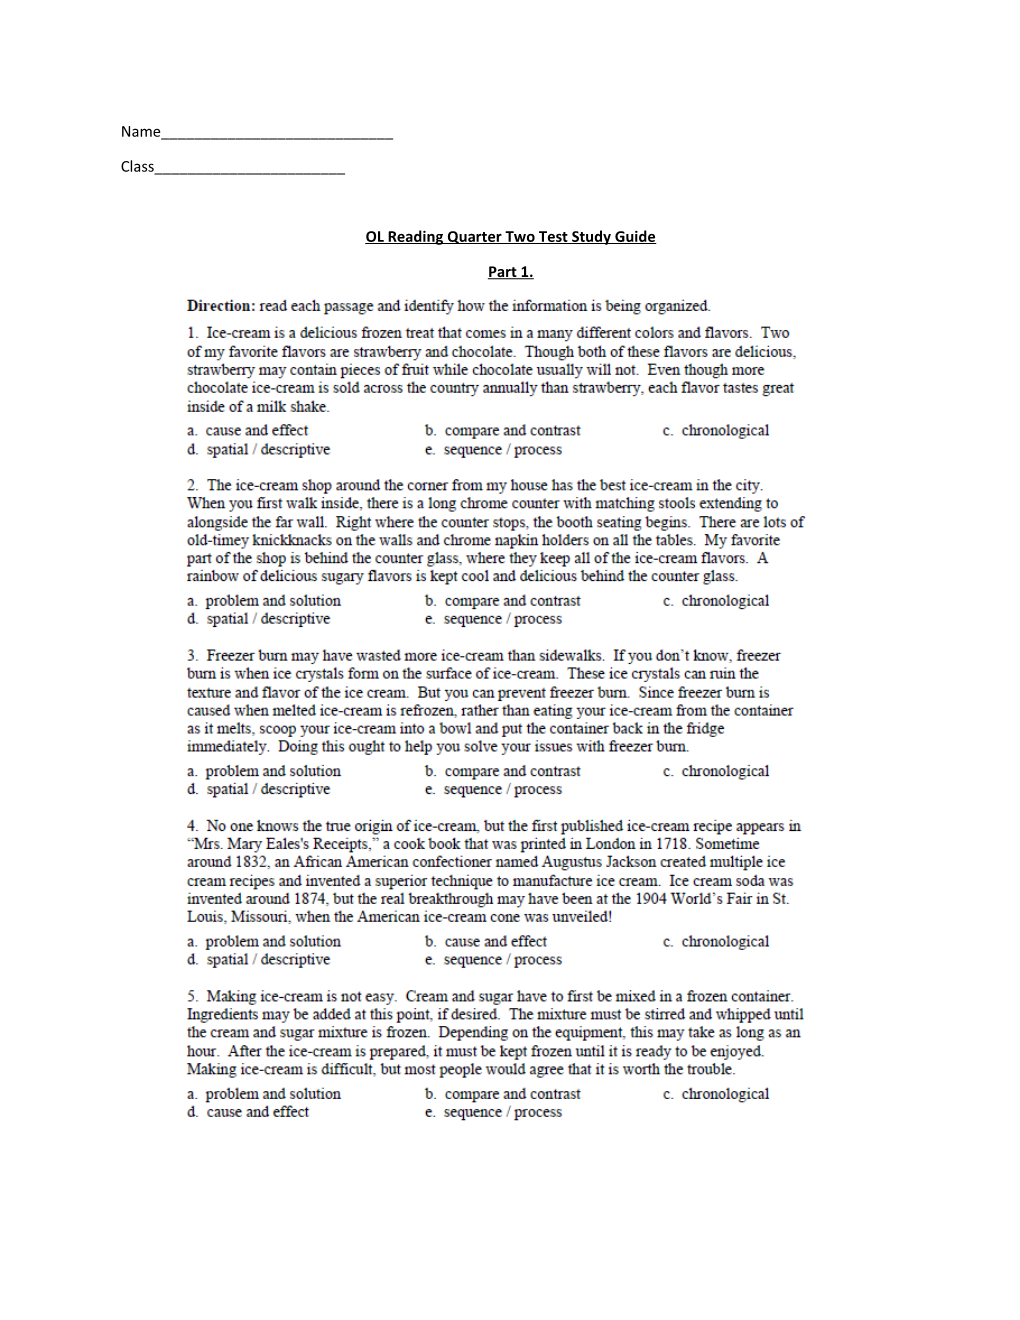 OL Reading Quarter Two Test Study Guide